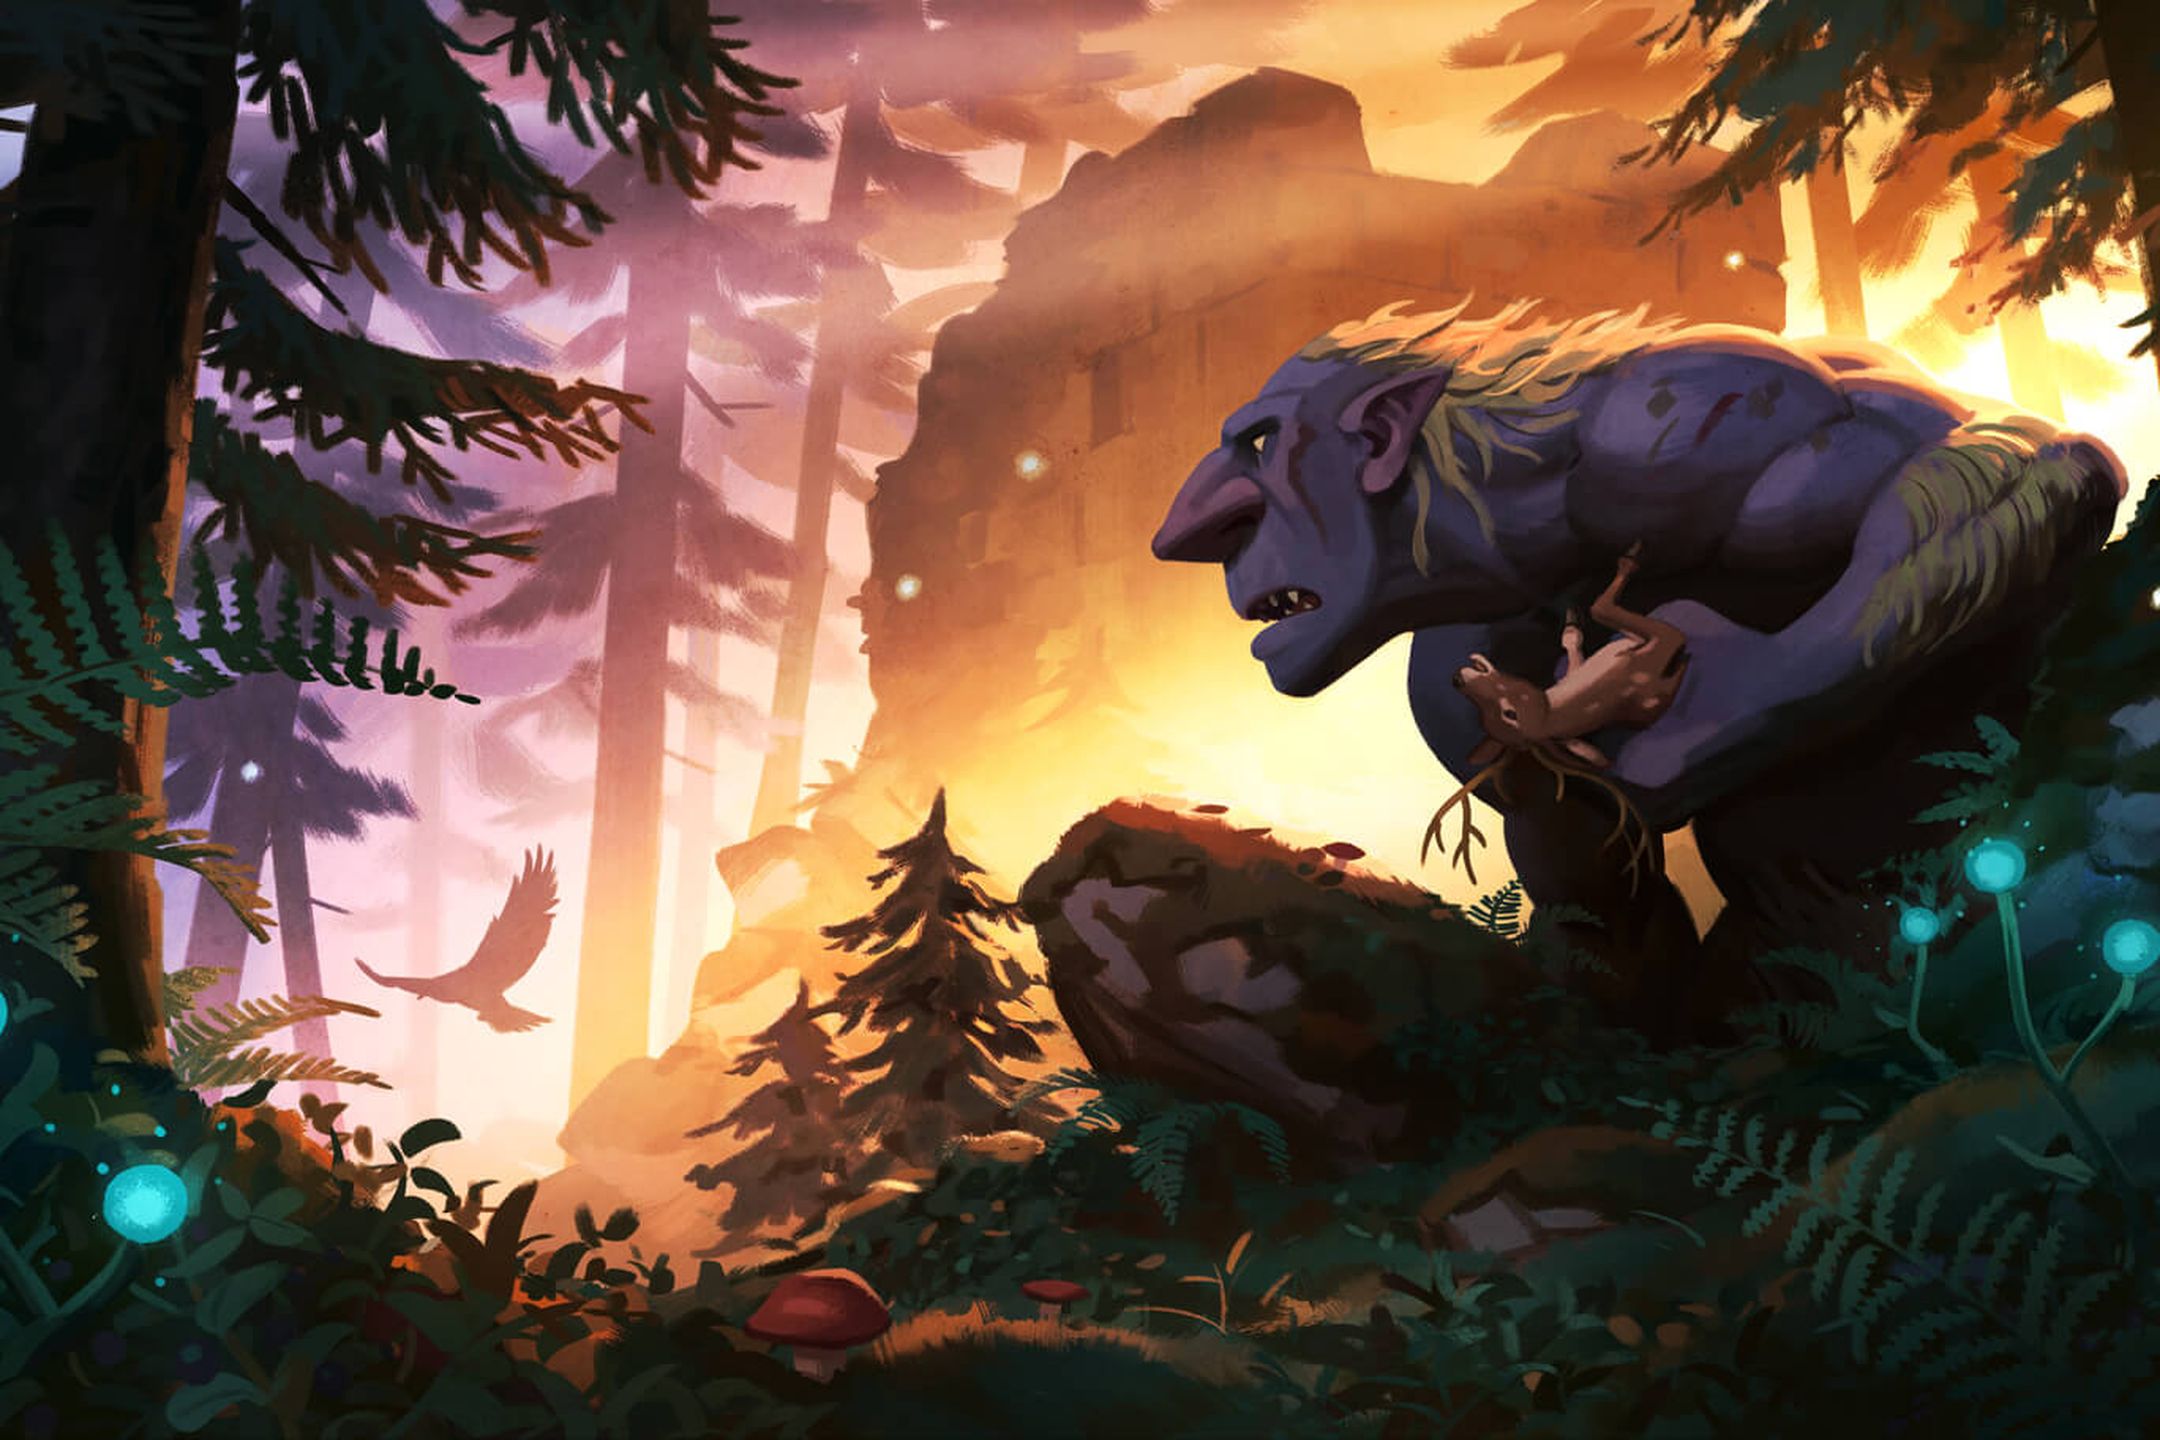 Artwork depicting troll in a forest setting